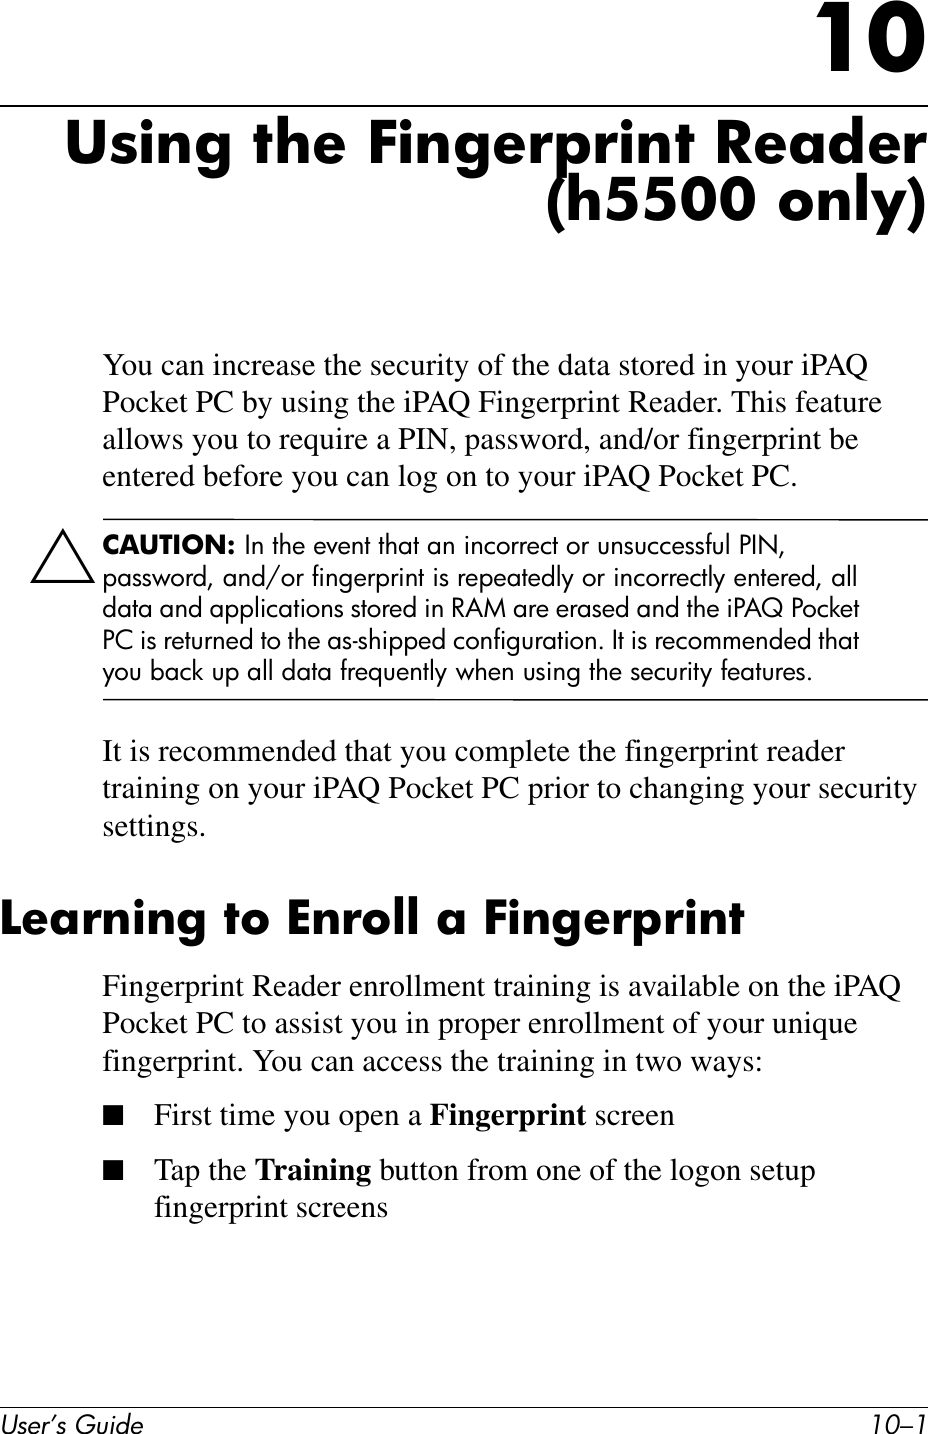 User’s Guide 10–110Using the Fingerprint Reader(h5500 only)You can increase the security of the data stored in your iPAQ Pocket PC by using the iPAQ Fingerprint Reader. This feature allows you to require a PIN, password, and/or fingerprint be entered before you can log on to your iPAQ Pocket PC.ÄCAUTION: In the event that an incorrect or unsuccessful PIN, password, and/or fingerprint is repeatedly or incorrectly entered, all data and applications stored in RAM are erased and the iPAQ Pocket PC is returned to the as-shipped configuration. It is recommended that you back up all data frequently when using the security features.It is recommended that you complete the fingerprint reader training on your iPAQ Pocket PC prior to changing your security settings.Learning to Enroll a FingerprintFingerprint Reader enrollment training is available on the iPAQ Pocket PC to assist you in proper enrollment of your unique fingerprint. You can access the training in two ways:■First time you open a Fingerprint screen■Tap the Training button from one of the logon setup fingerprint screens